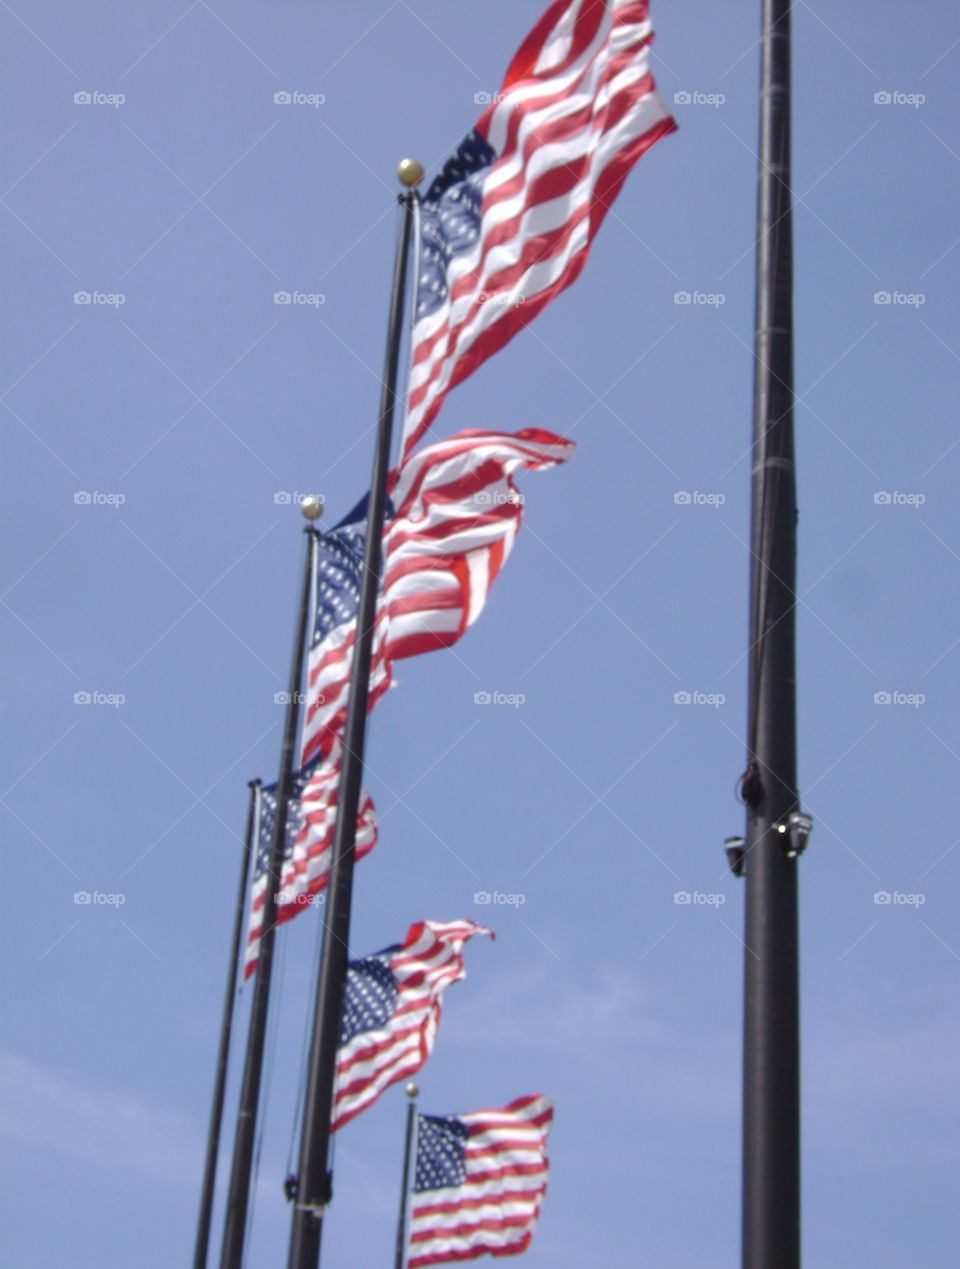 American flags blowing in wind. Photo taken at Navy Pier in Chicago.  U.S. Flags blowing in the wind.